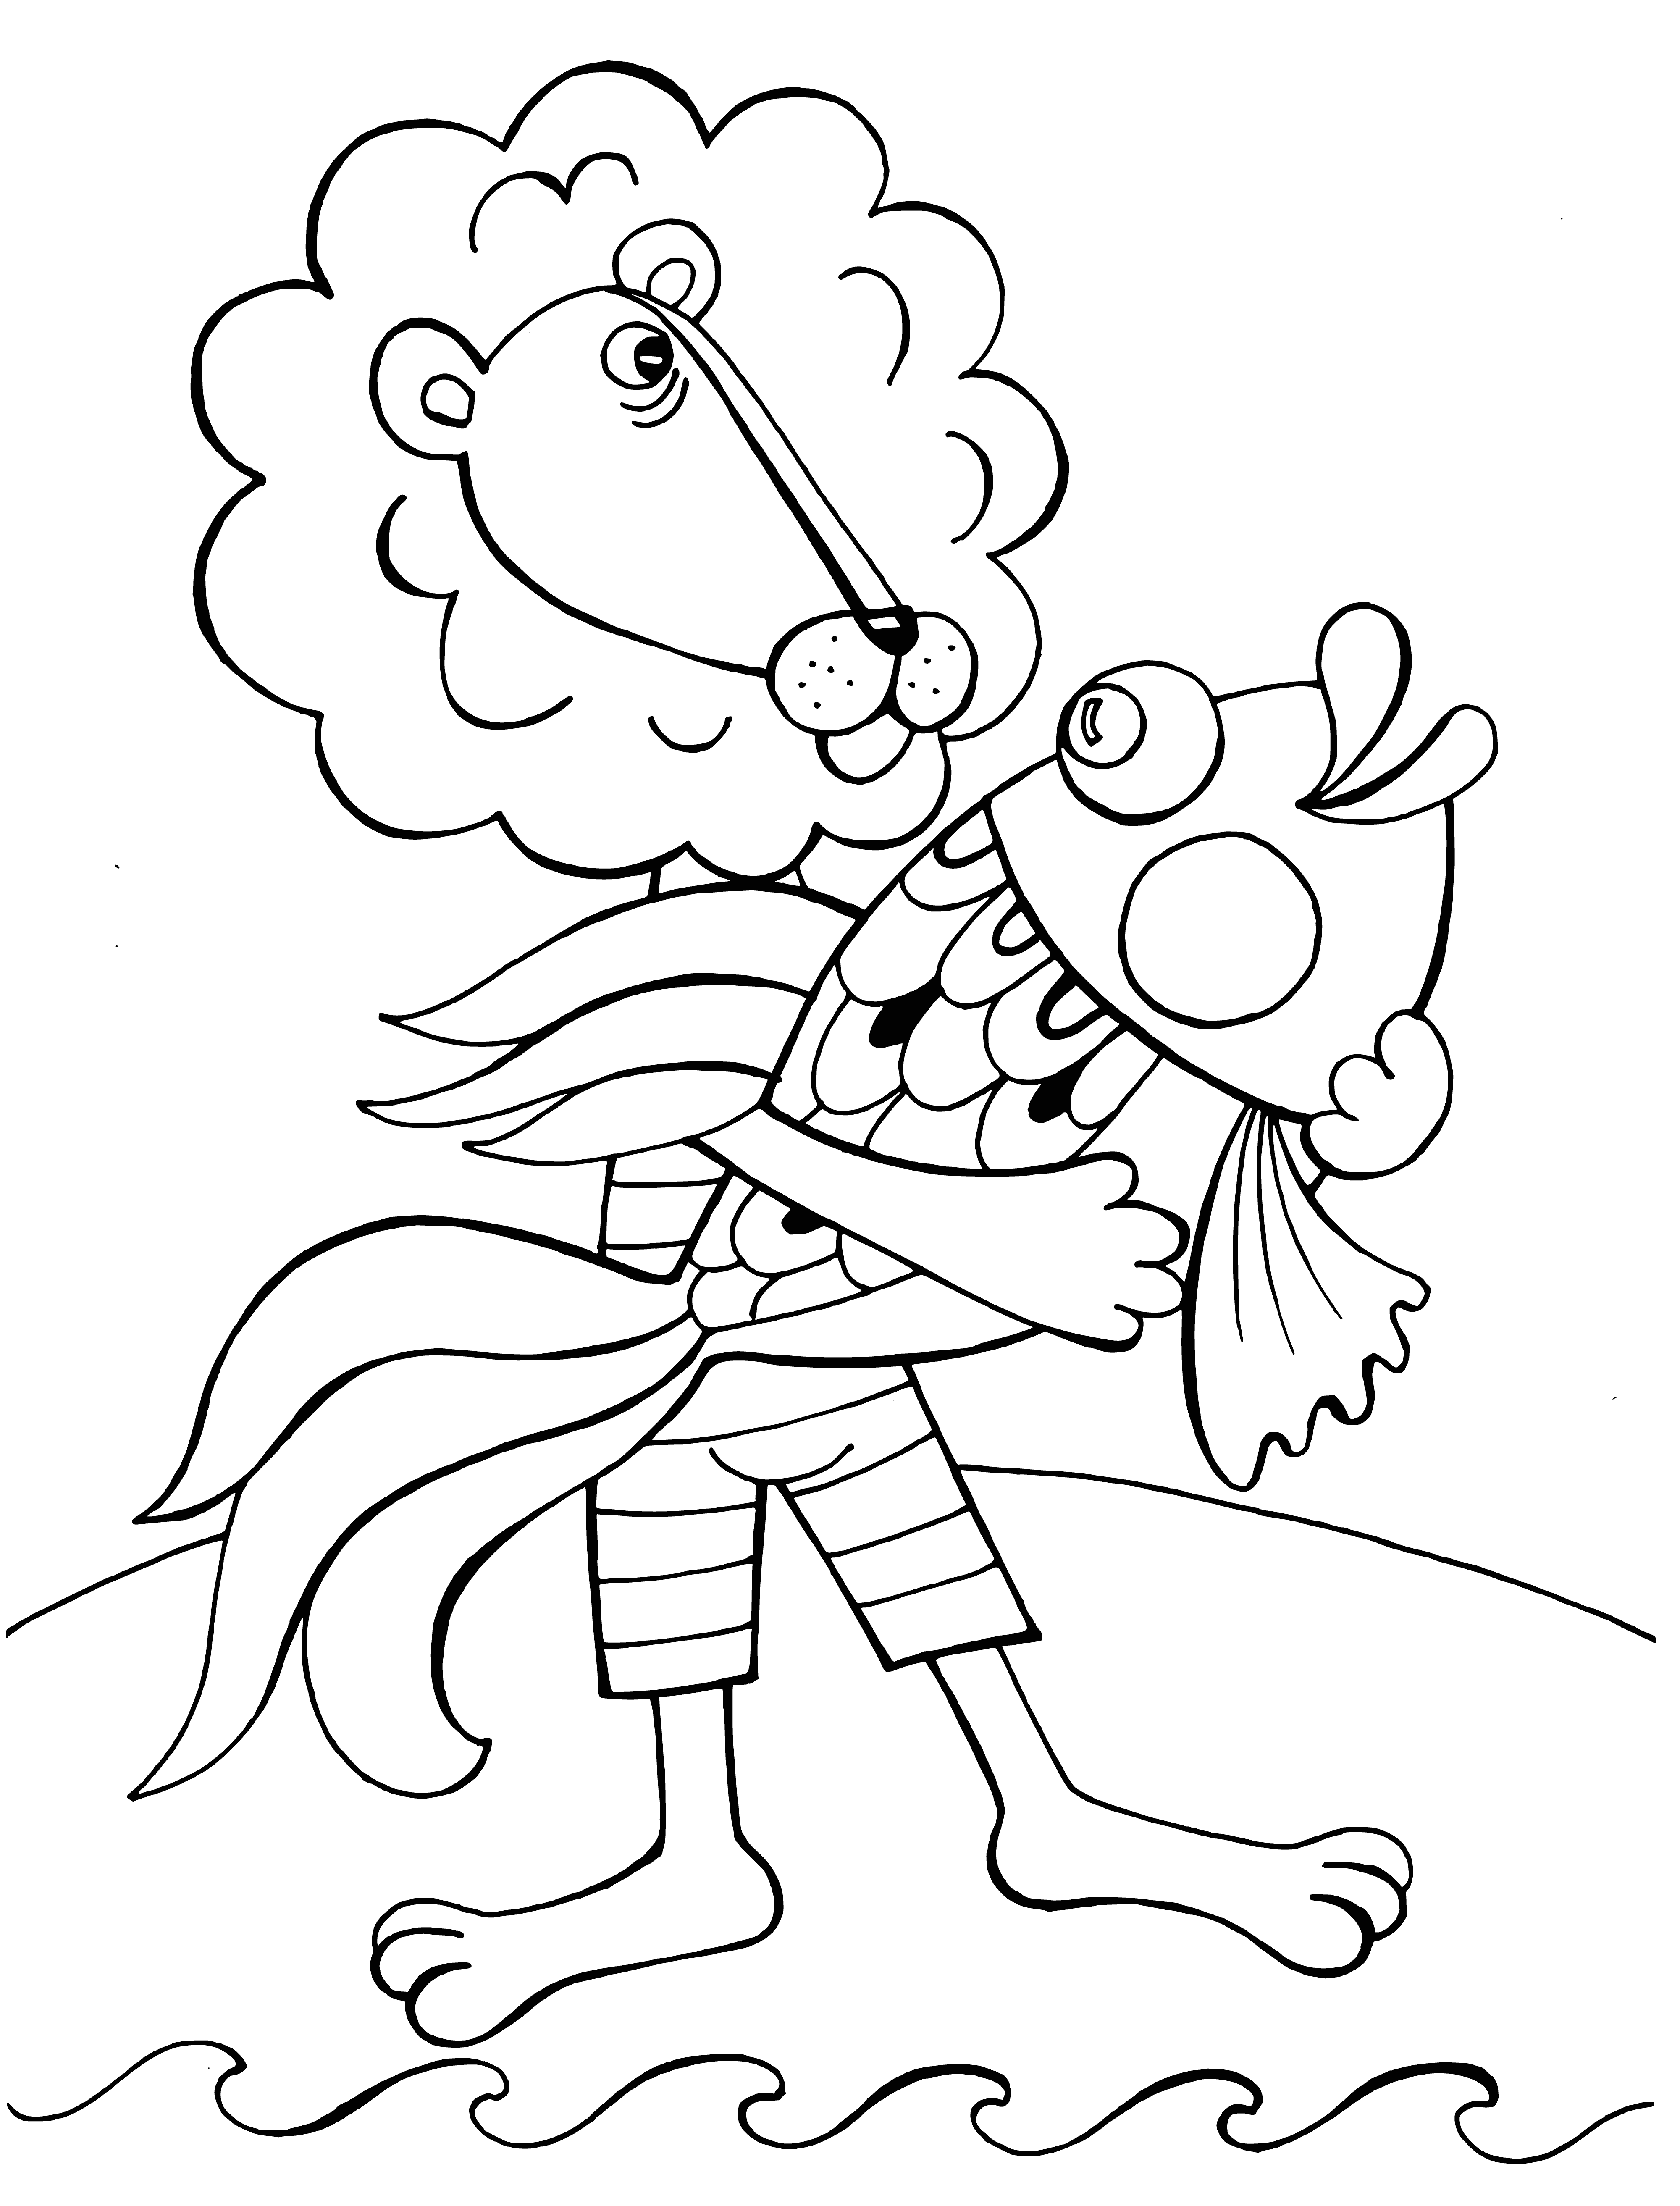 coloring page: The Vacation Boniface is a goldfish with dark brown body, white belly, and pale, transparent fins. It has two large black spots on its side.